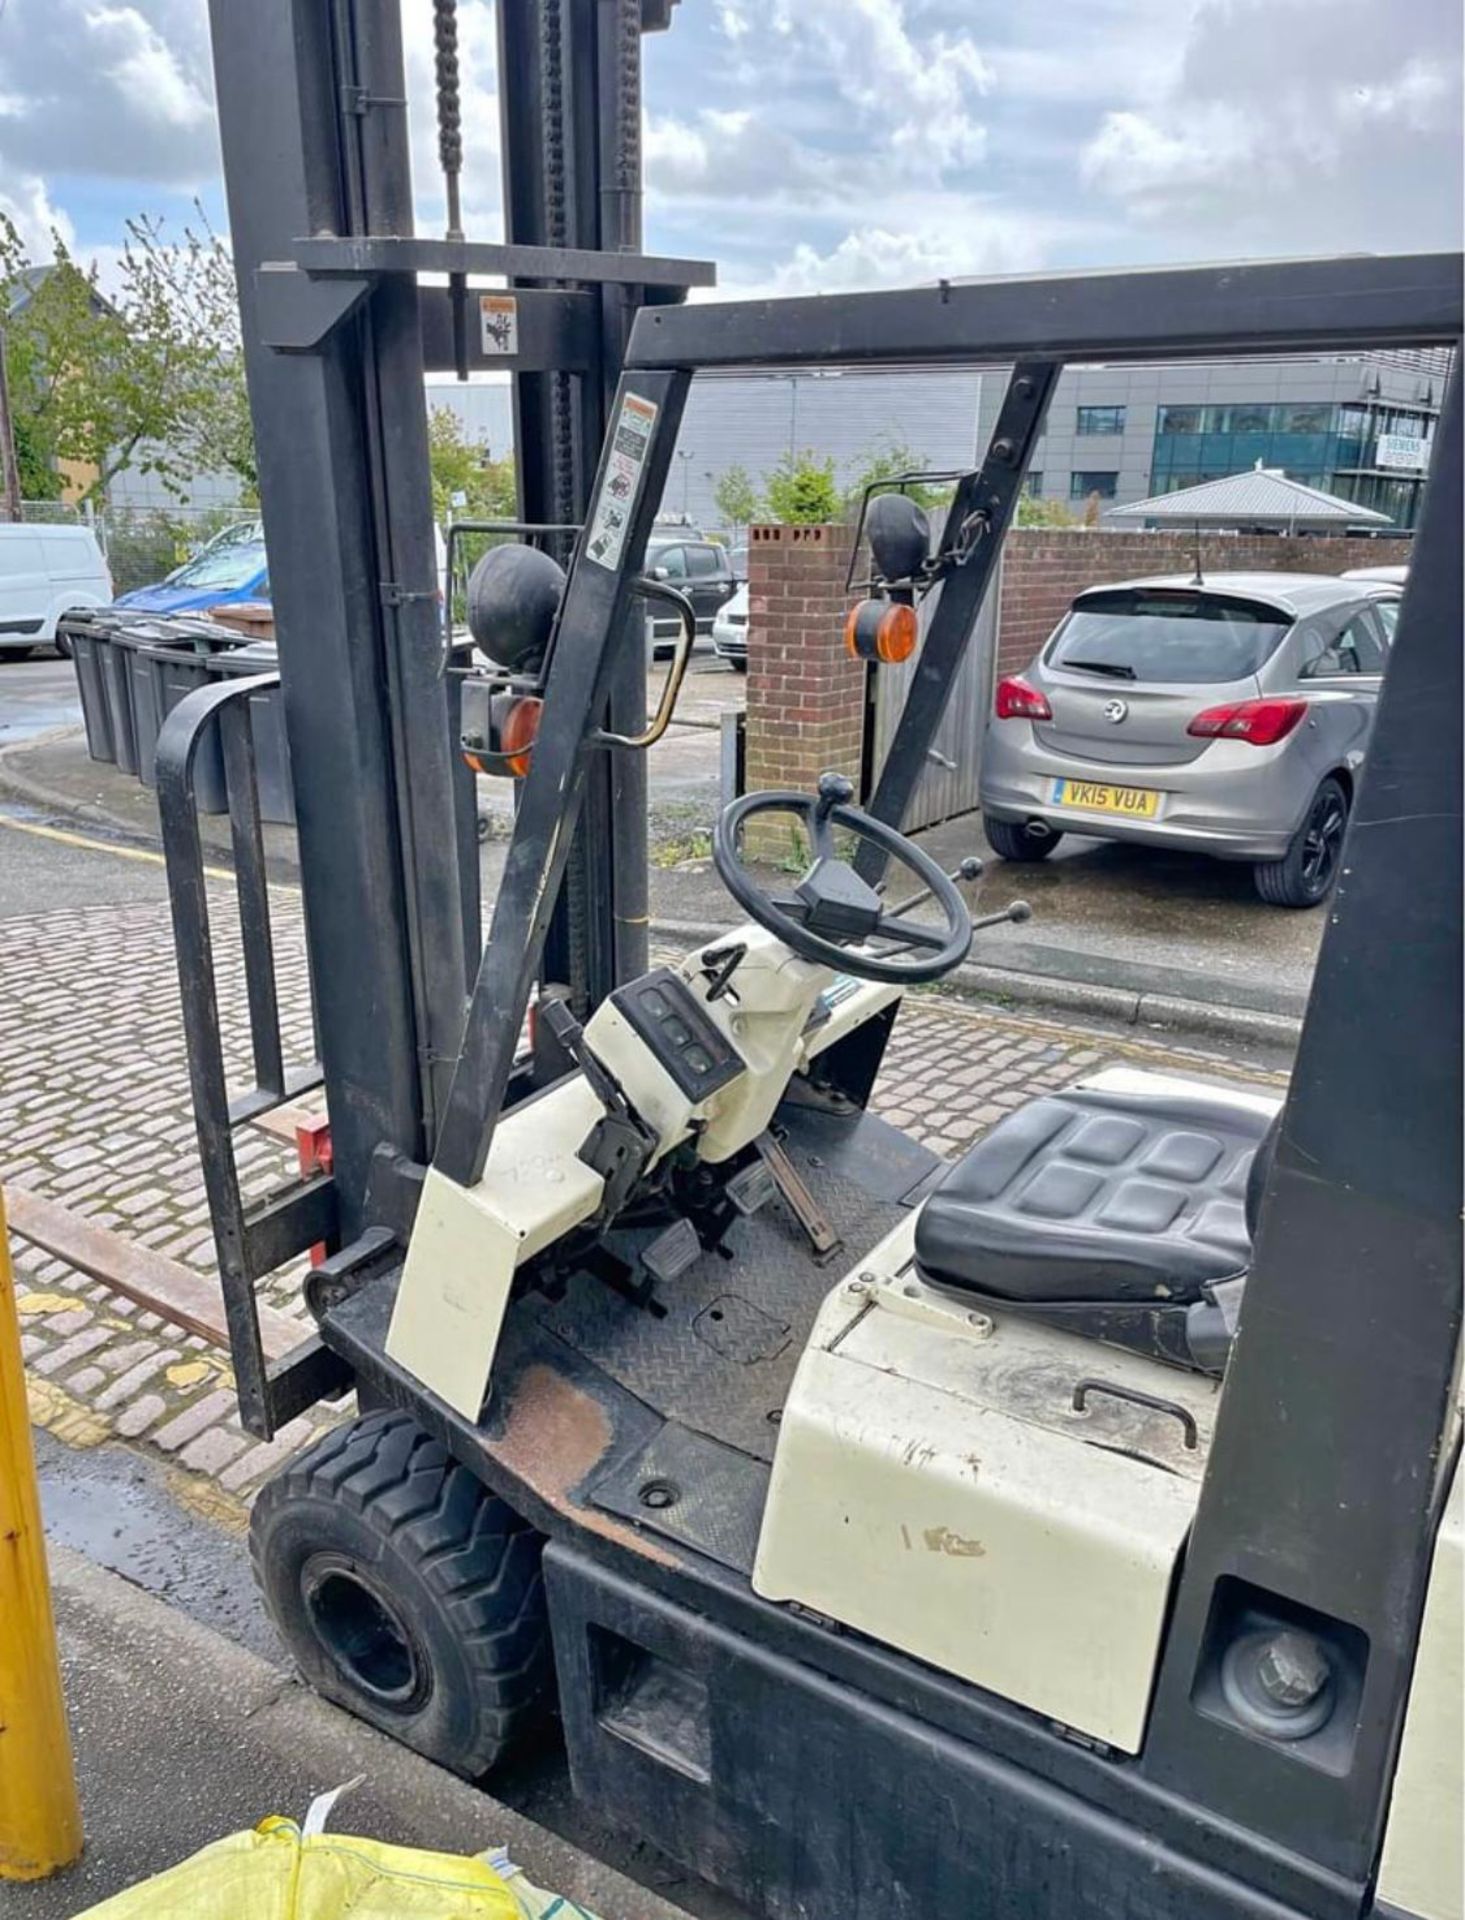 NISSAN 2.5TON GAS FORKLIFT - 5430 HOURS - Image 4 of 10